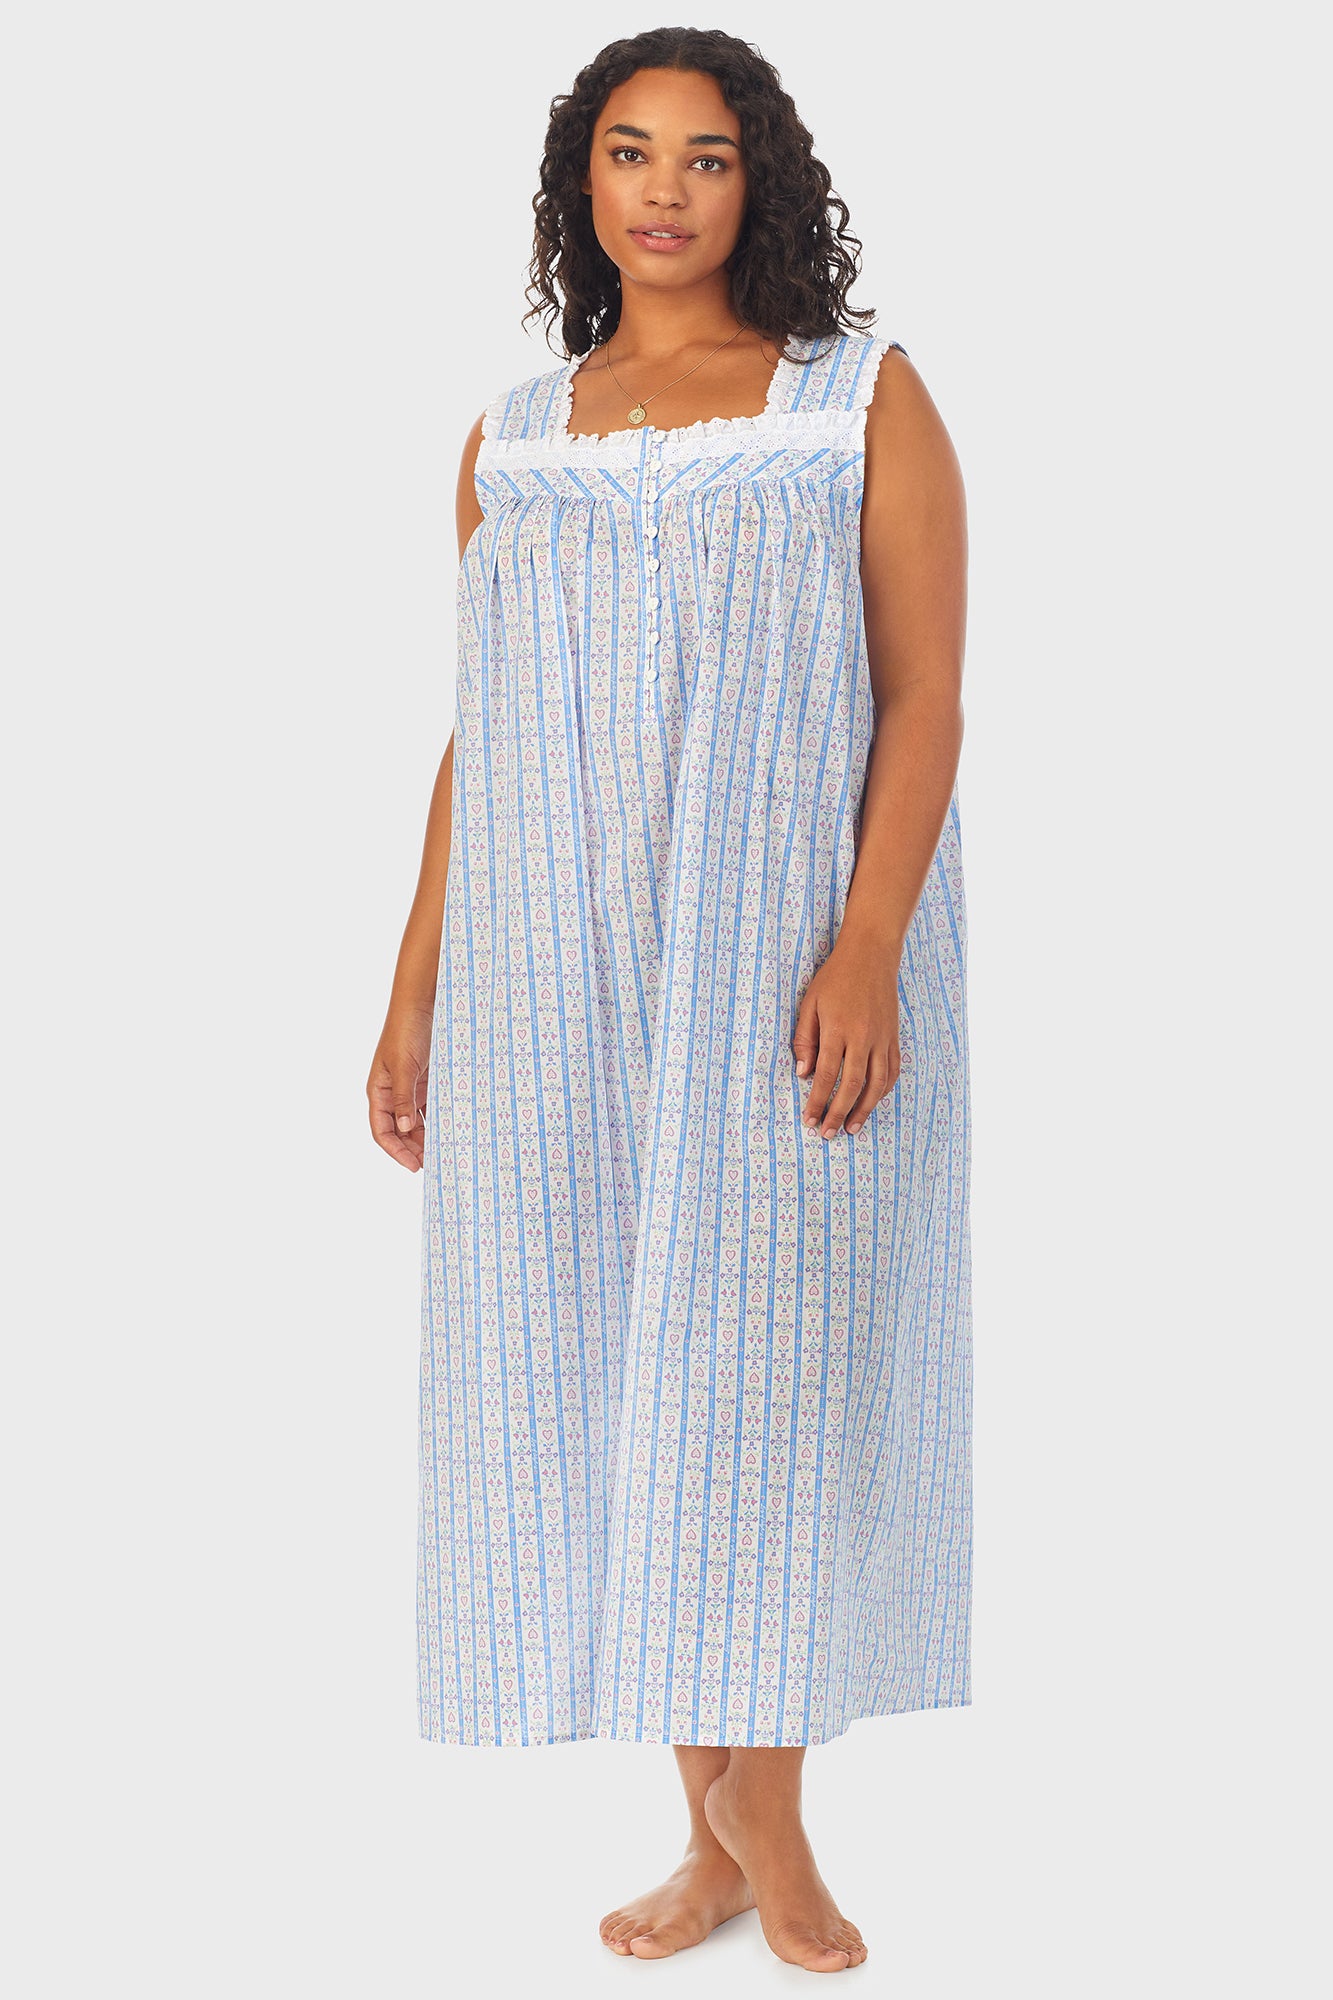 A lady wearing white long nightgown with blue pattern